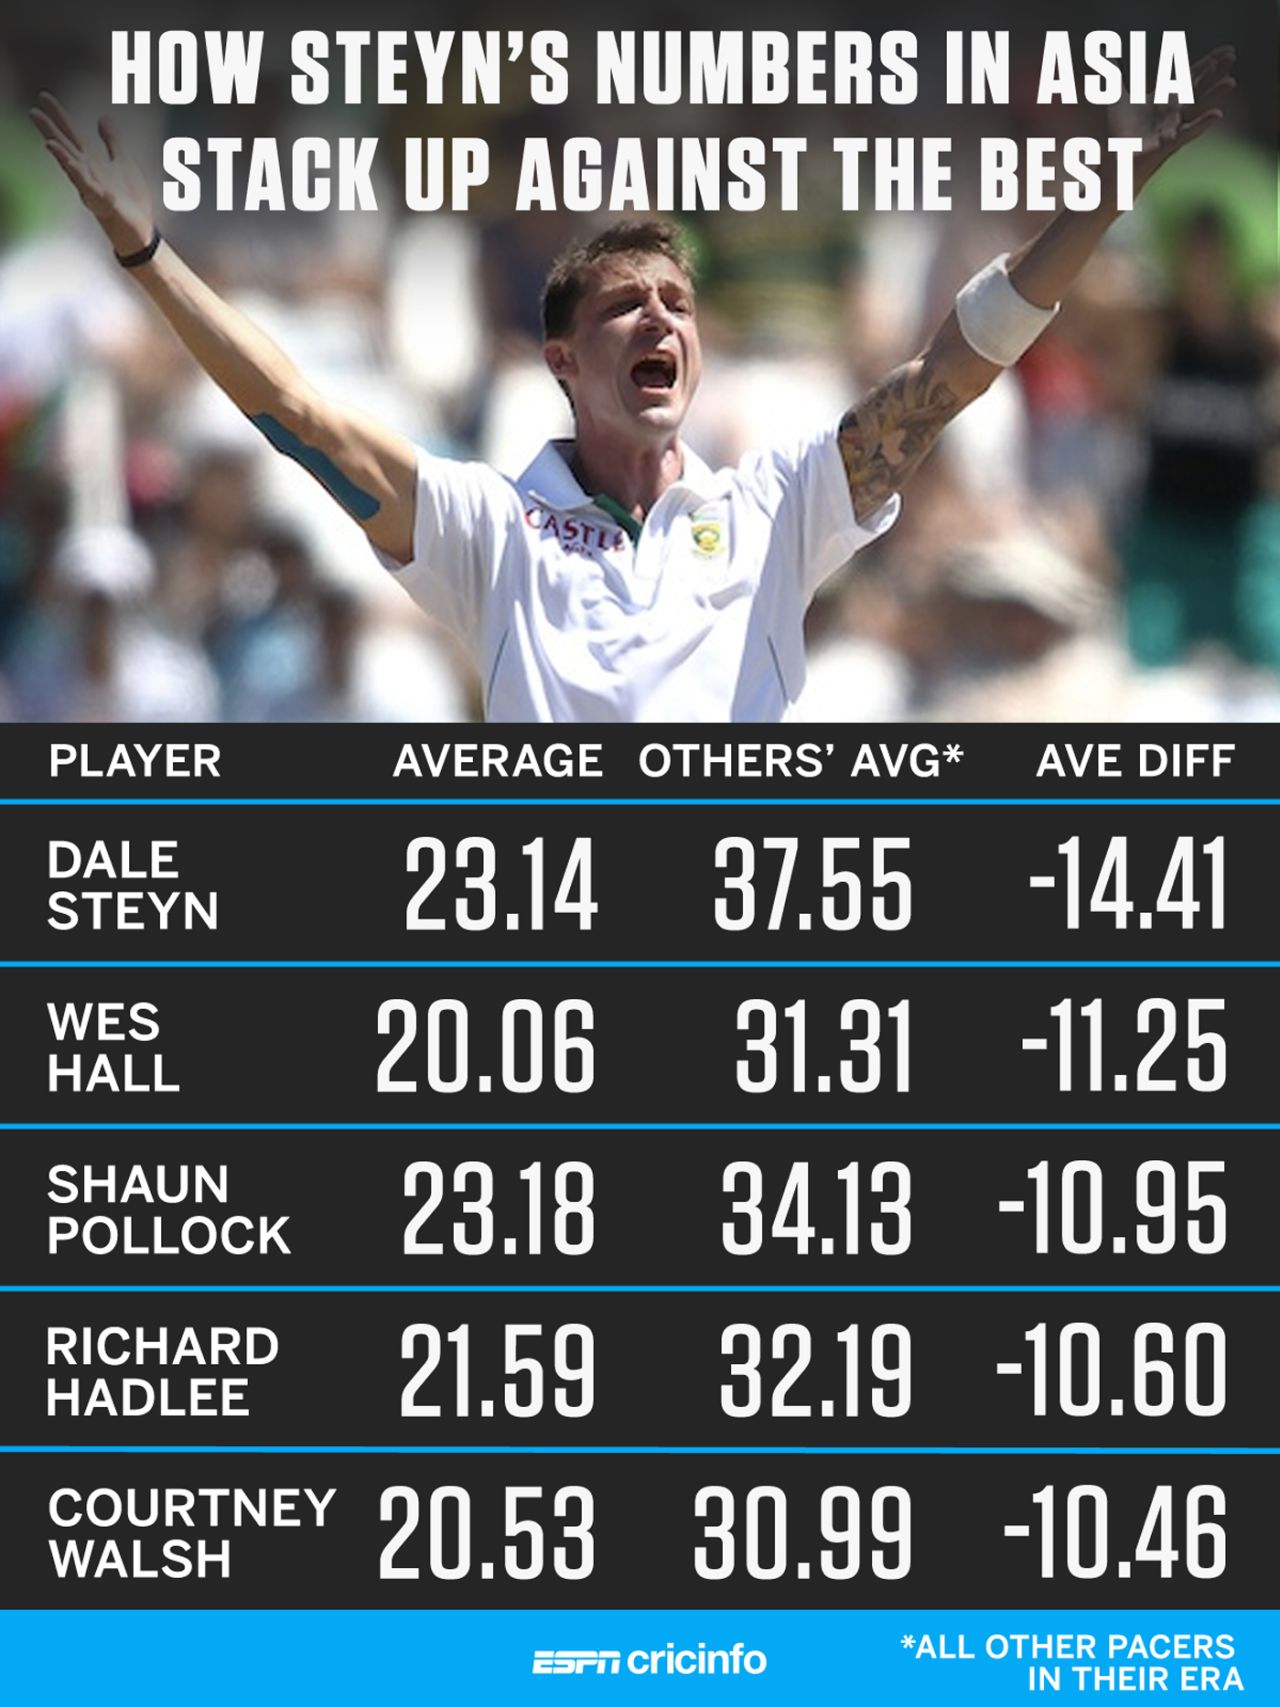 How Steyn's numbers in Asia stack up against the rest, July 18, 2018